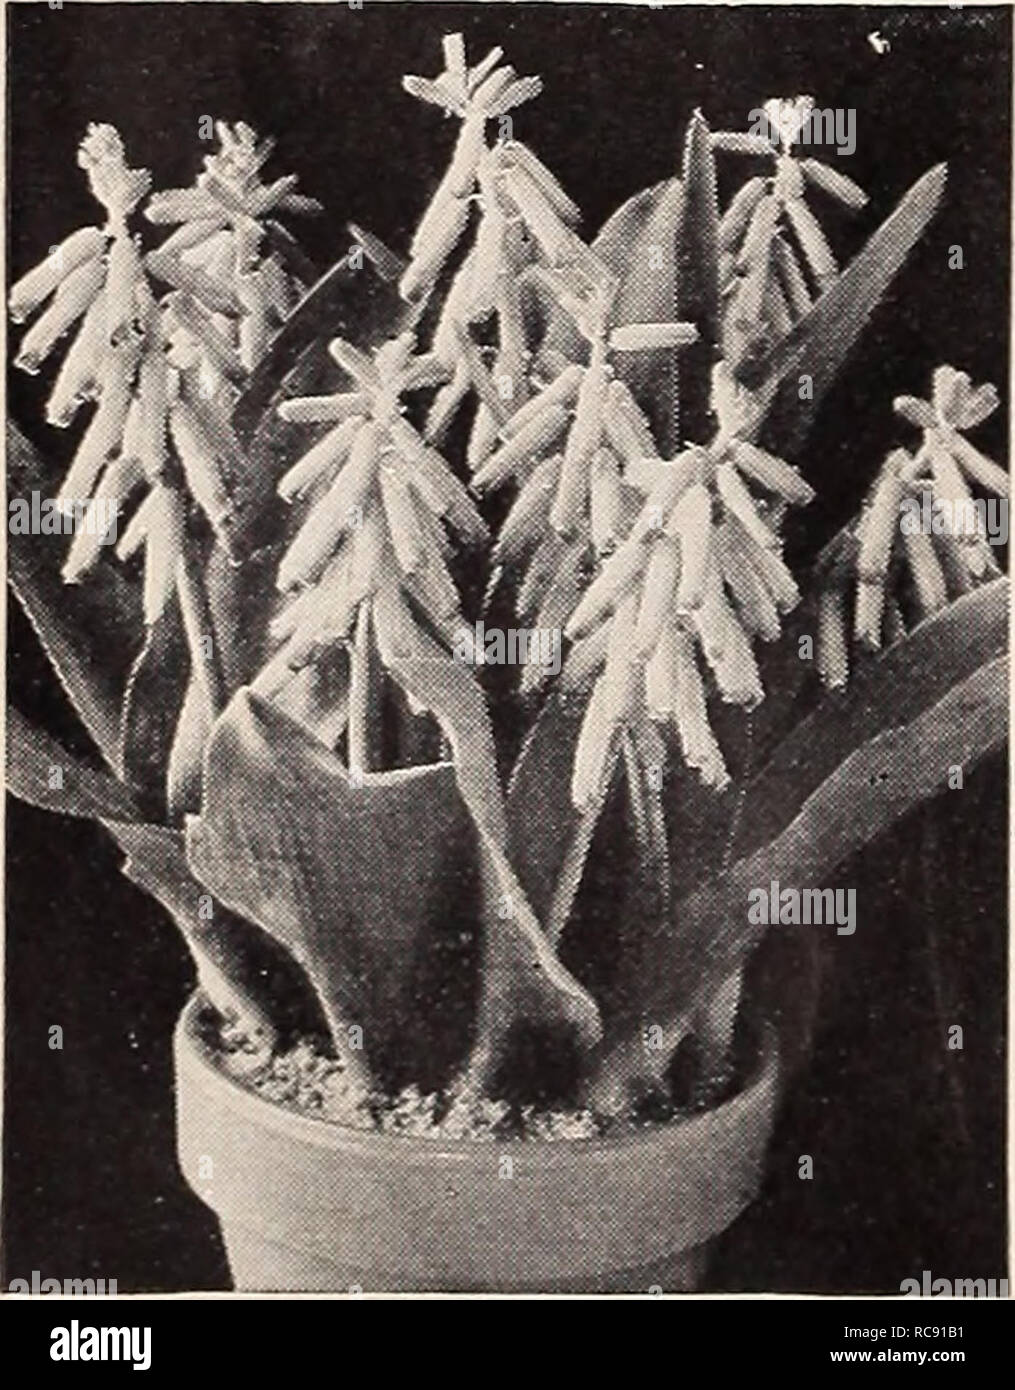 . Dreer's autumn planting guide for 1940. Bulbs (Plants) Catalogs; Flowers Seeds Catalogs; Gardening Equipment and supplies Catalogs; Nurseries (Horticulture) Catalogs; Vegetables Seeds Catalogs. Ixia—African Corn Lily 40-530 Ixia—African Corn Lily These are half-hardy bulbs from the Cape of Good Hope. They are primarily for indoor culture but will do equally well in a well-drained cold frame outdoors. The flowers are of the most brilliant rich and varied hues including yellow, pink, carmine, orange, red, blue, scarlet, and white. Jumbo Bulbs: 3 for 15c; 12 for 50c; 25 for 85c; 100 for §3.25.. Stock Photo